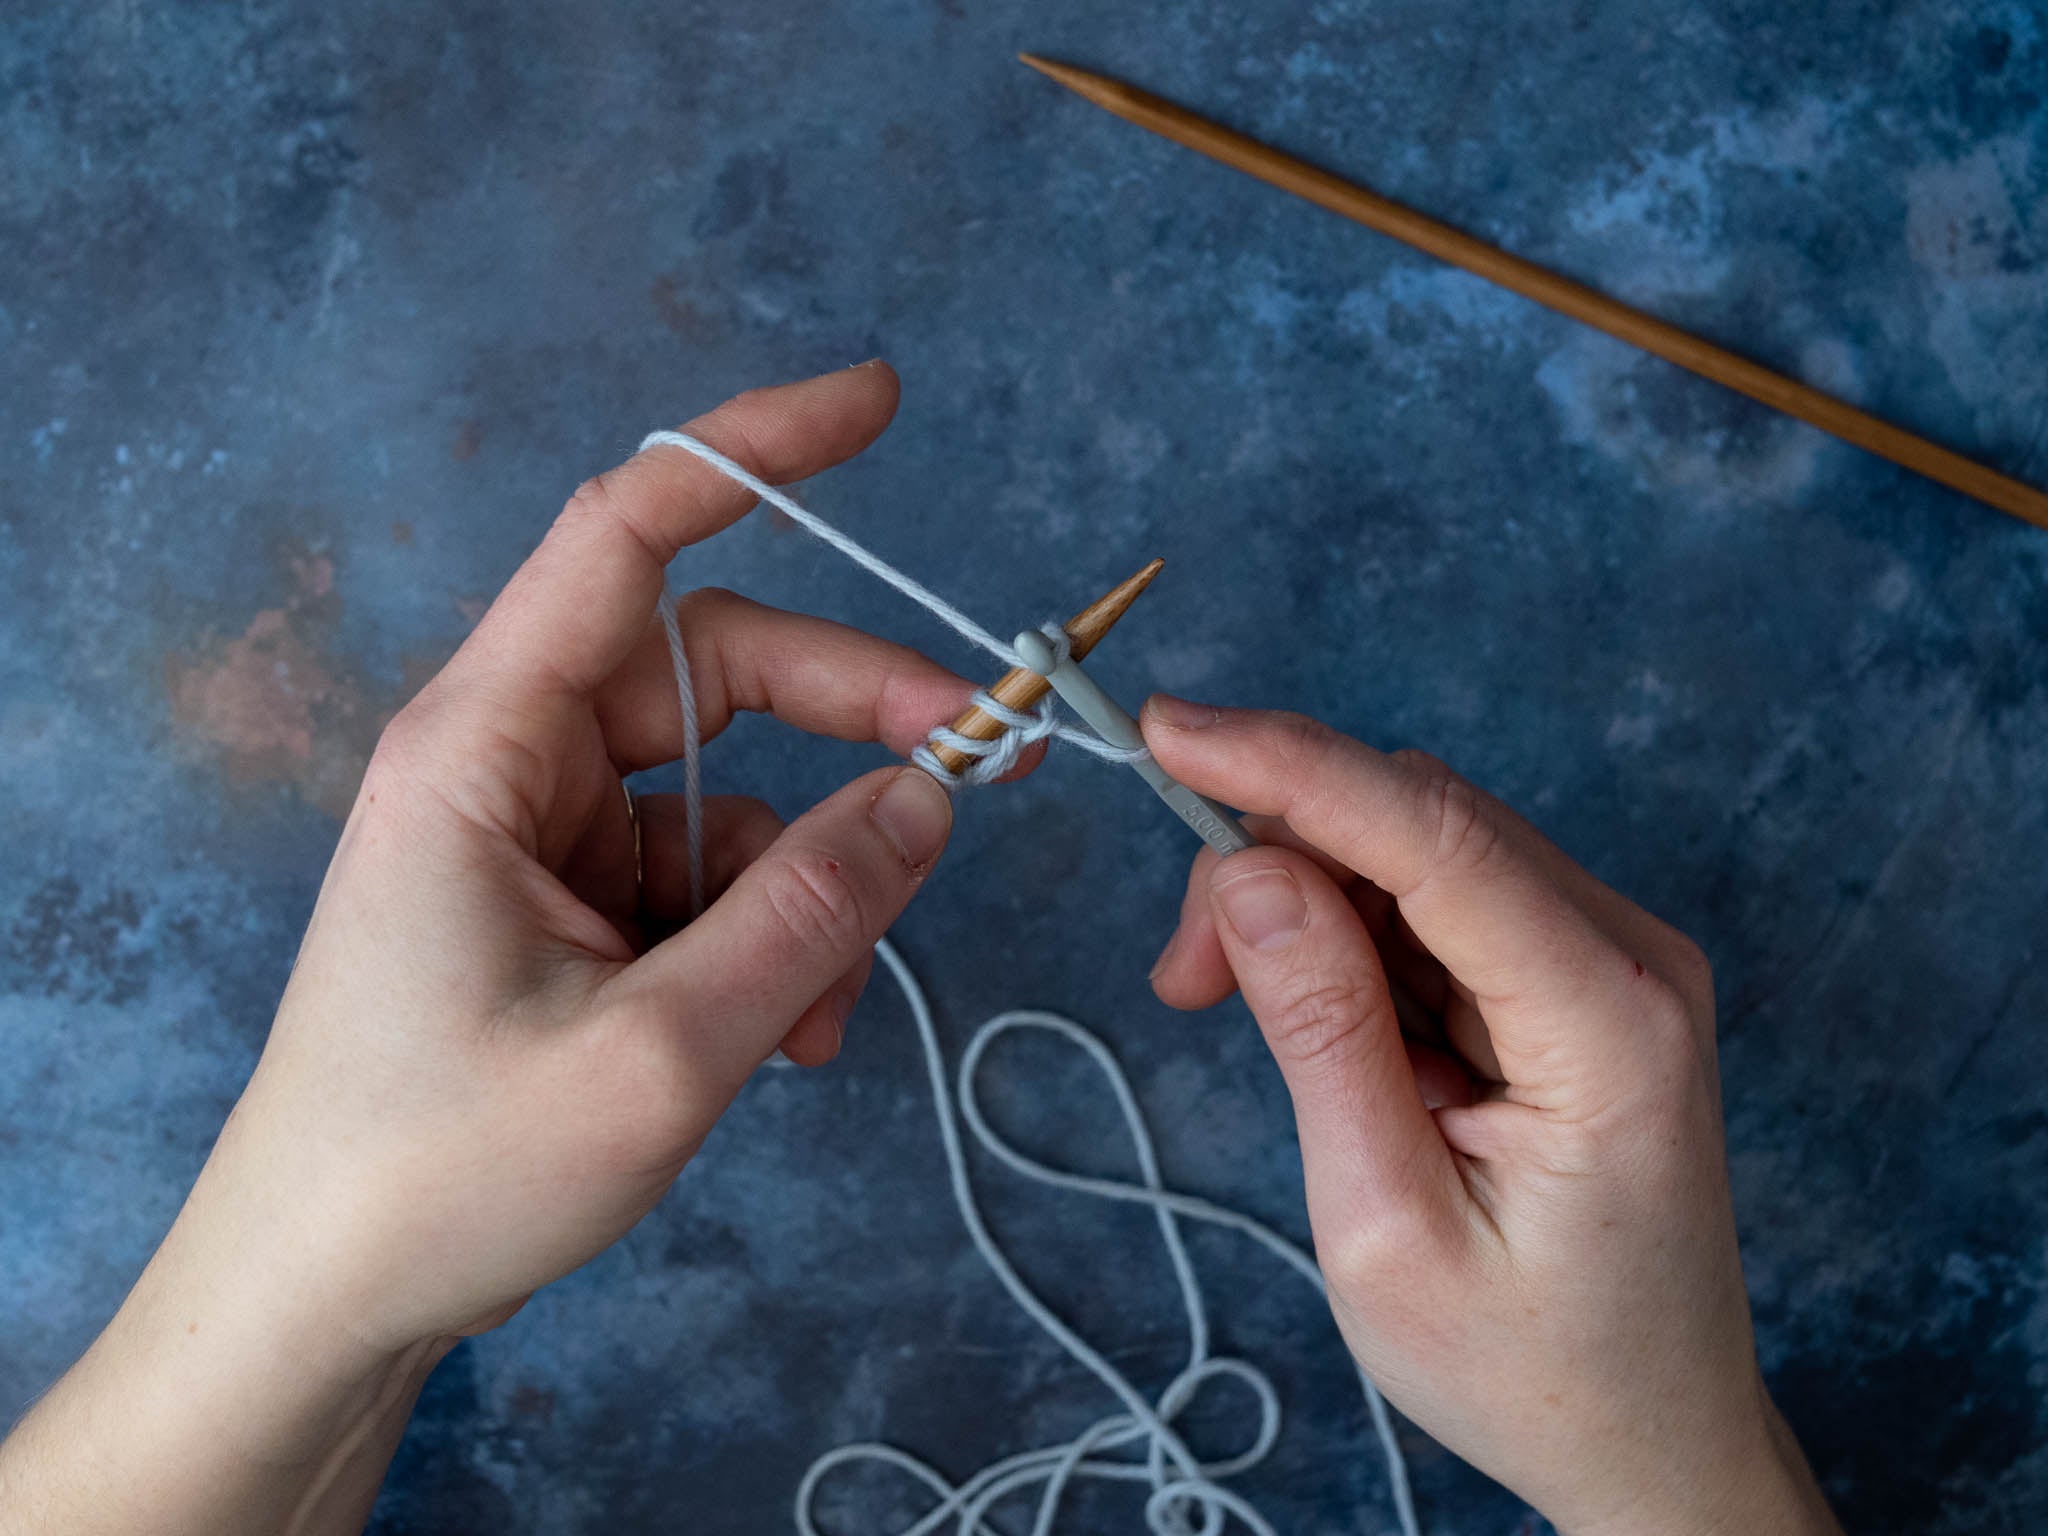 What Is an Alternative for a Crochet Needle?